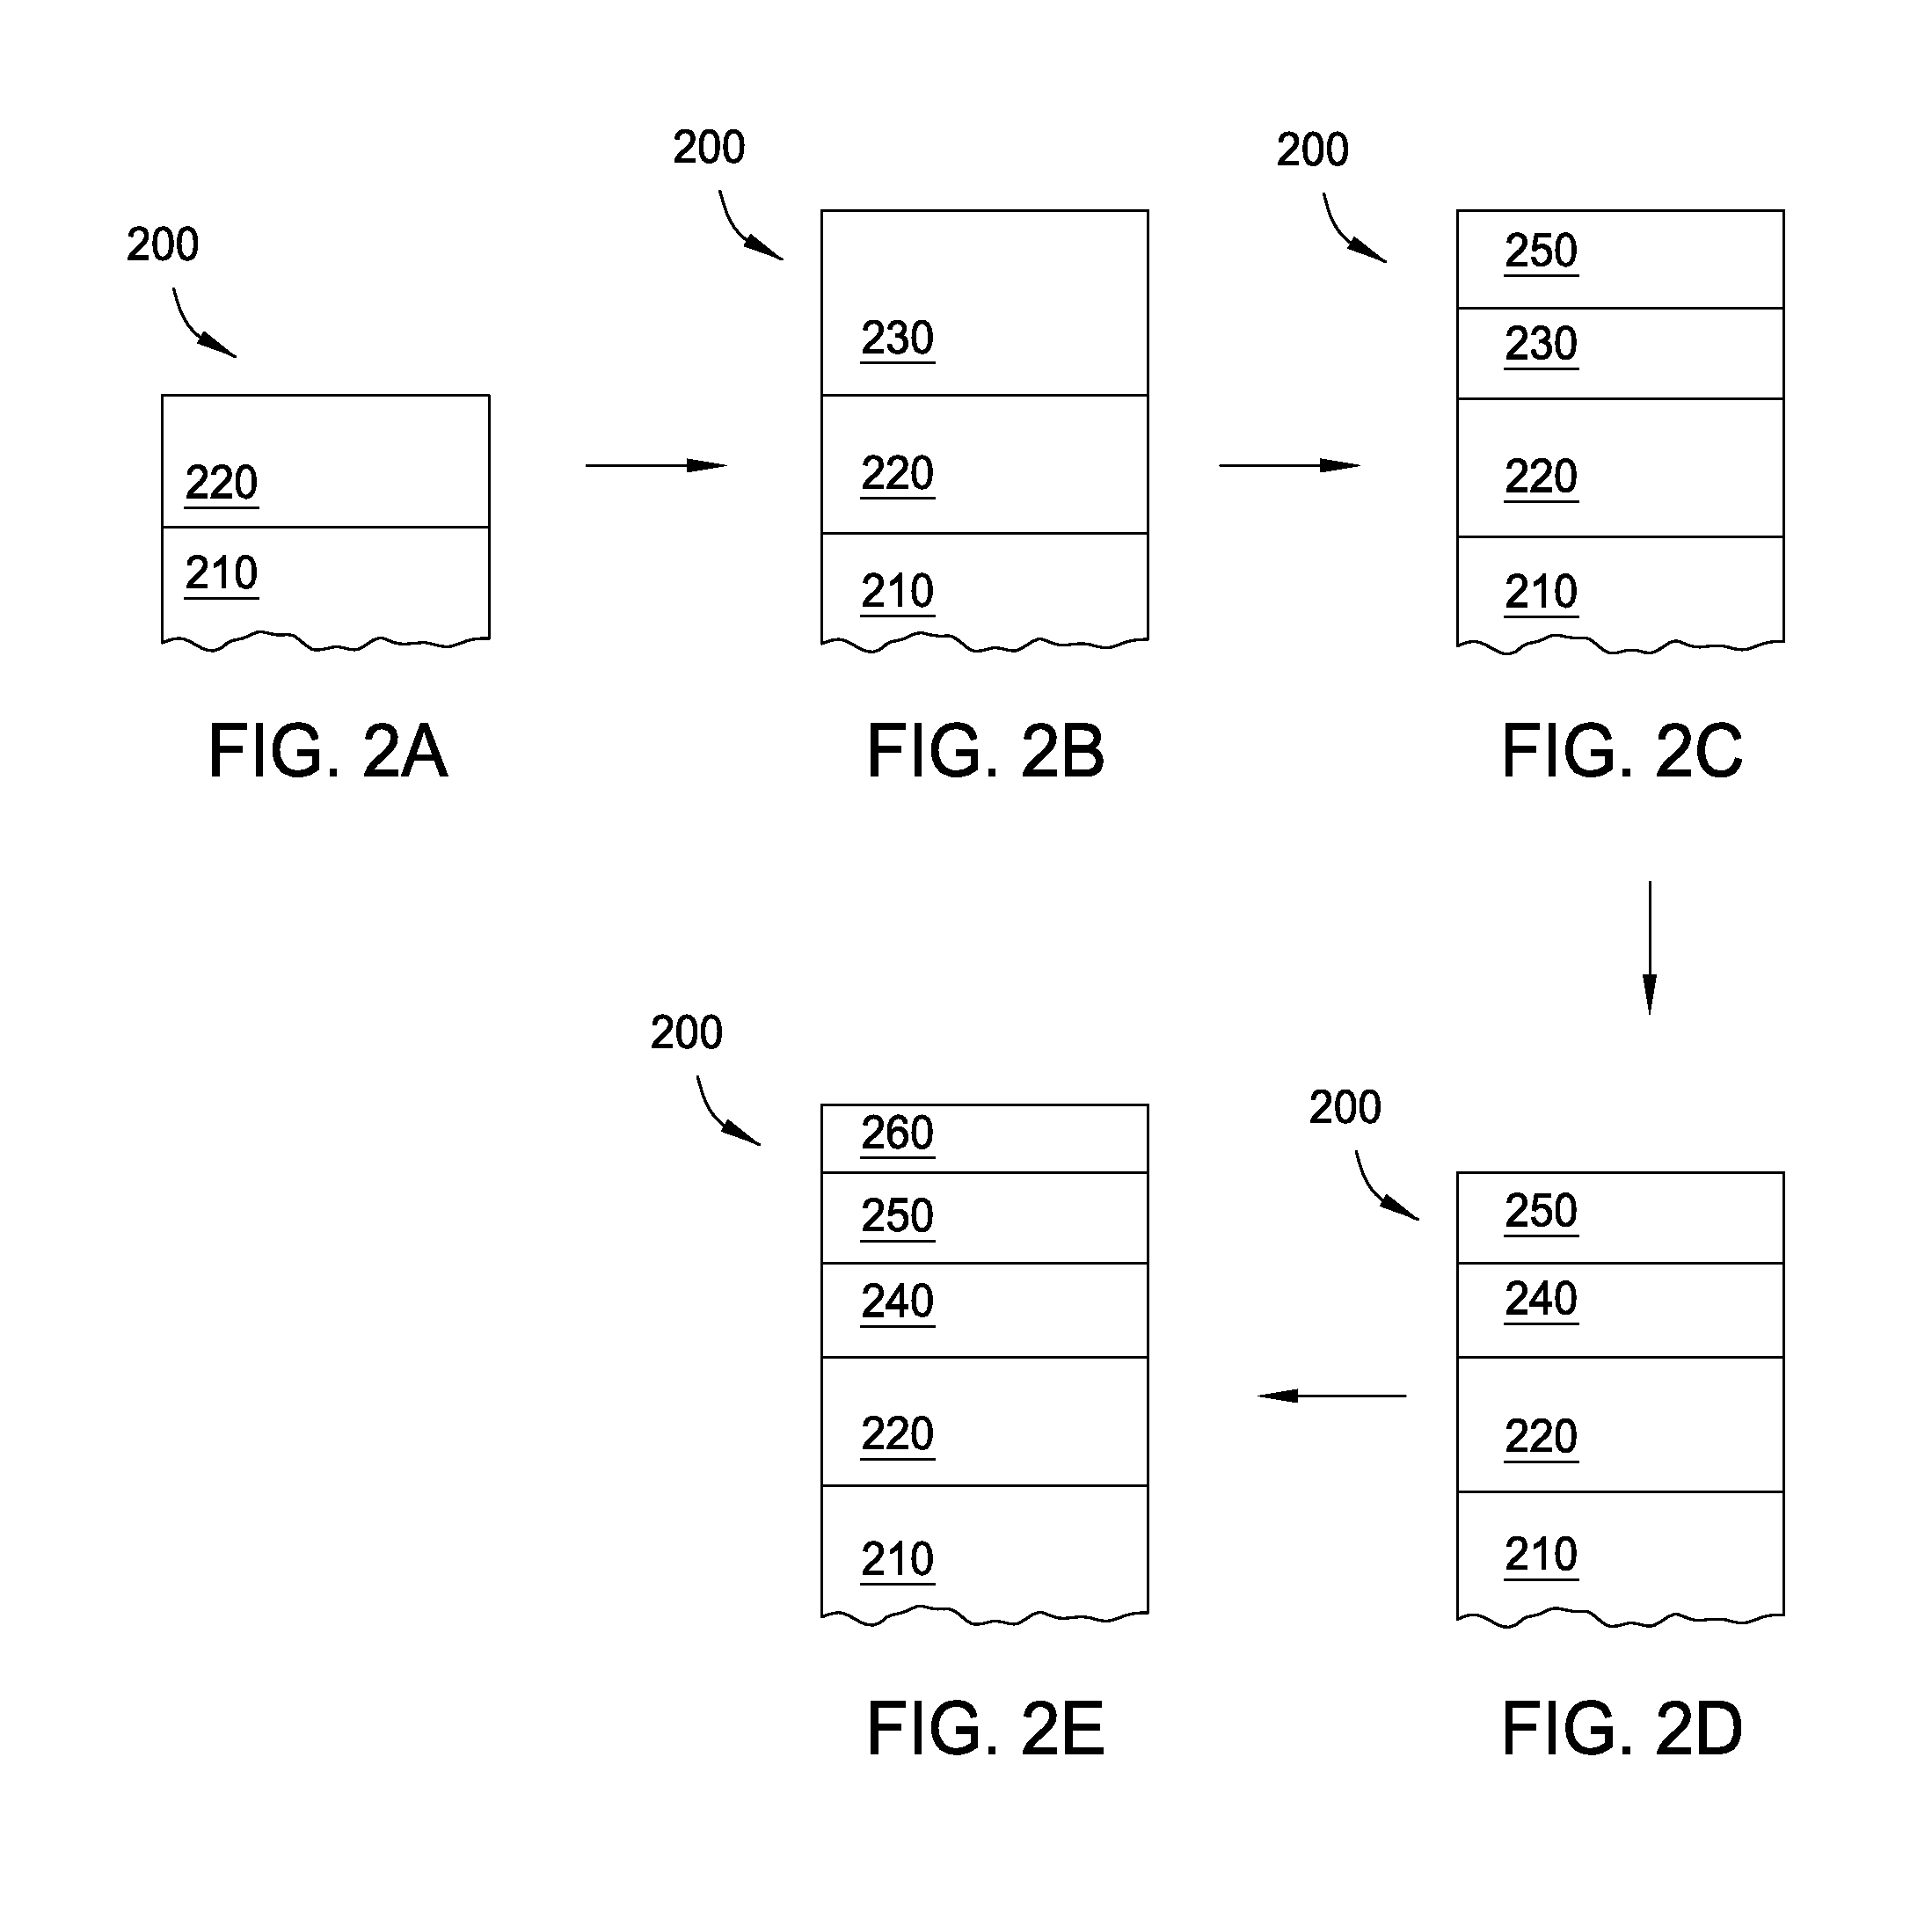 Method for forming metal oxides and silicides in a memory device